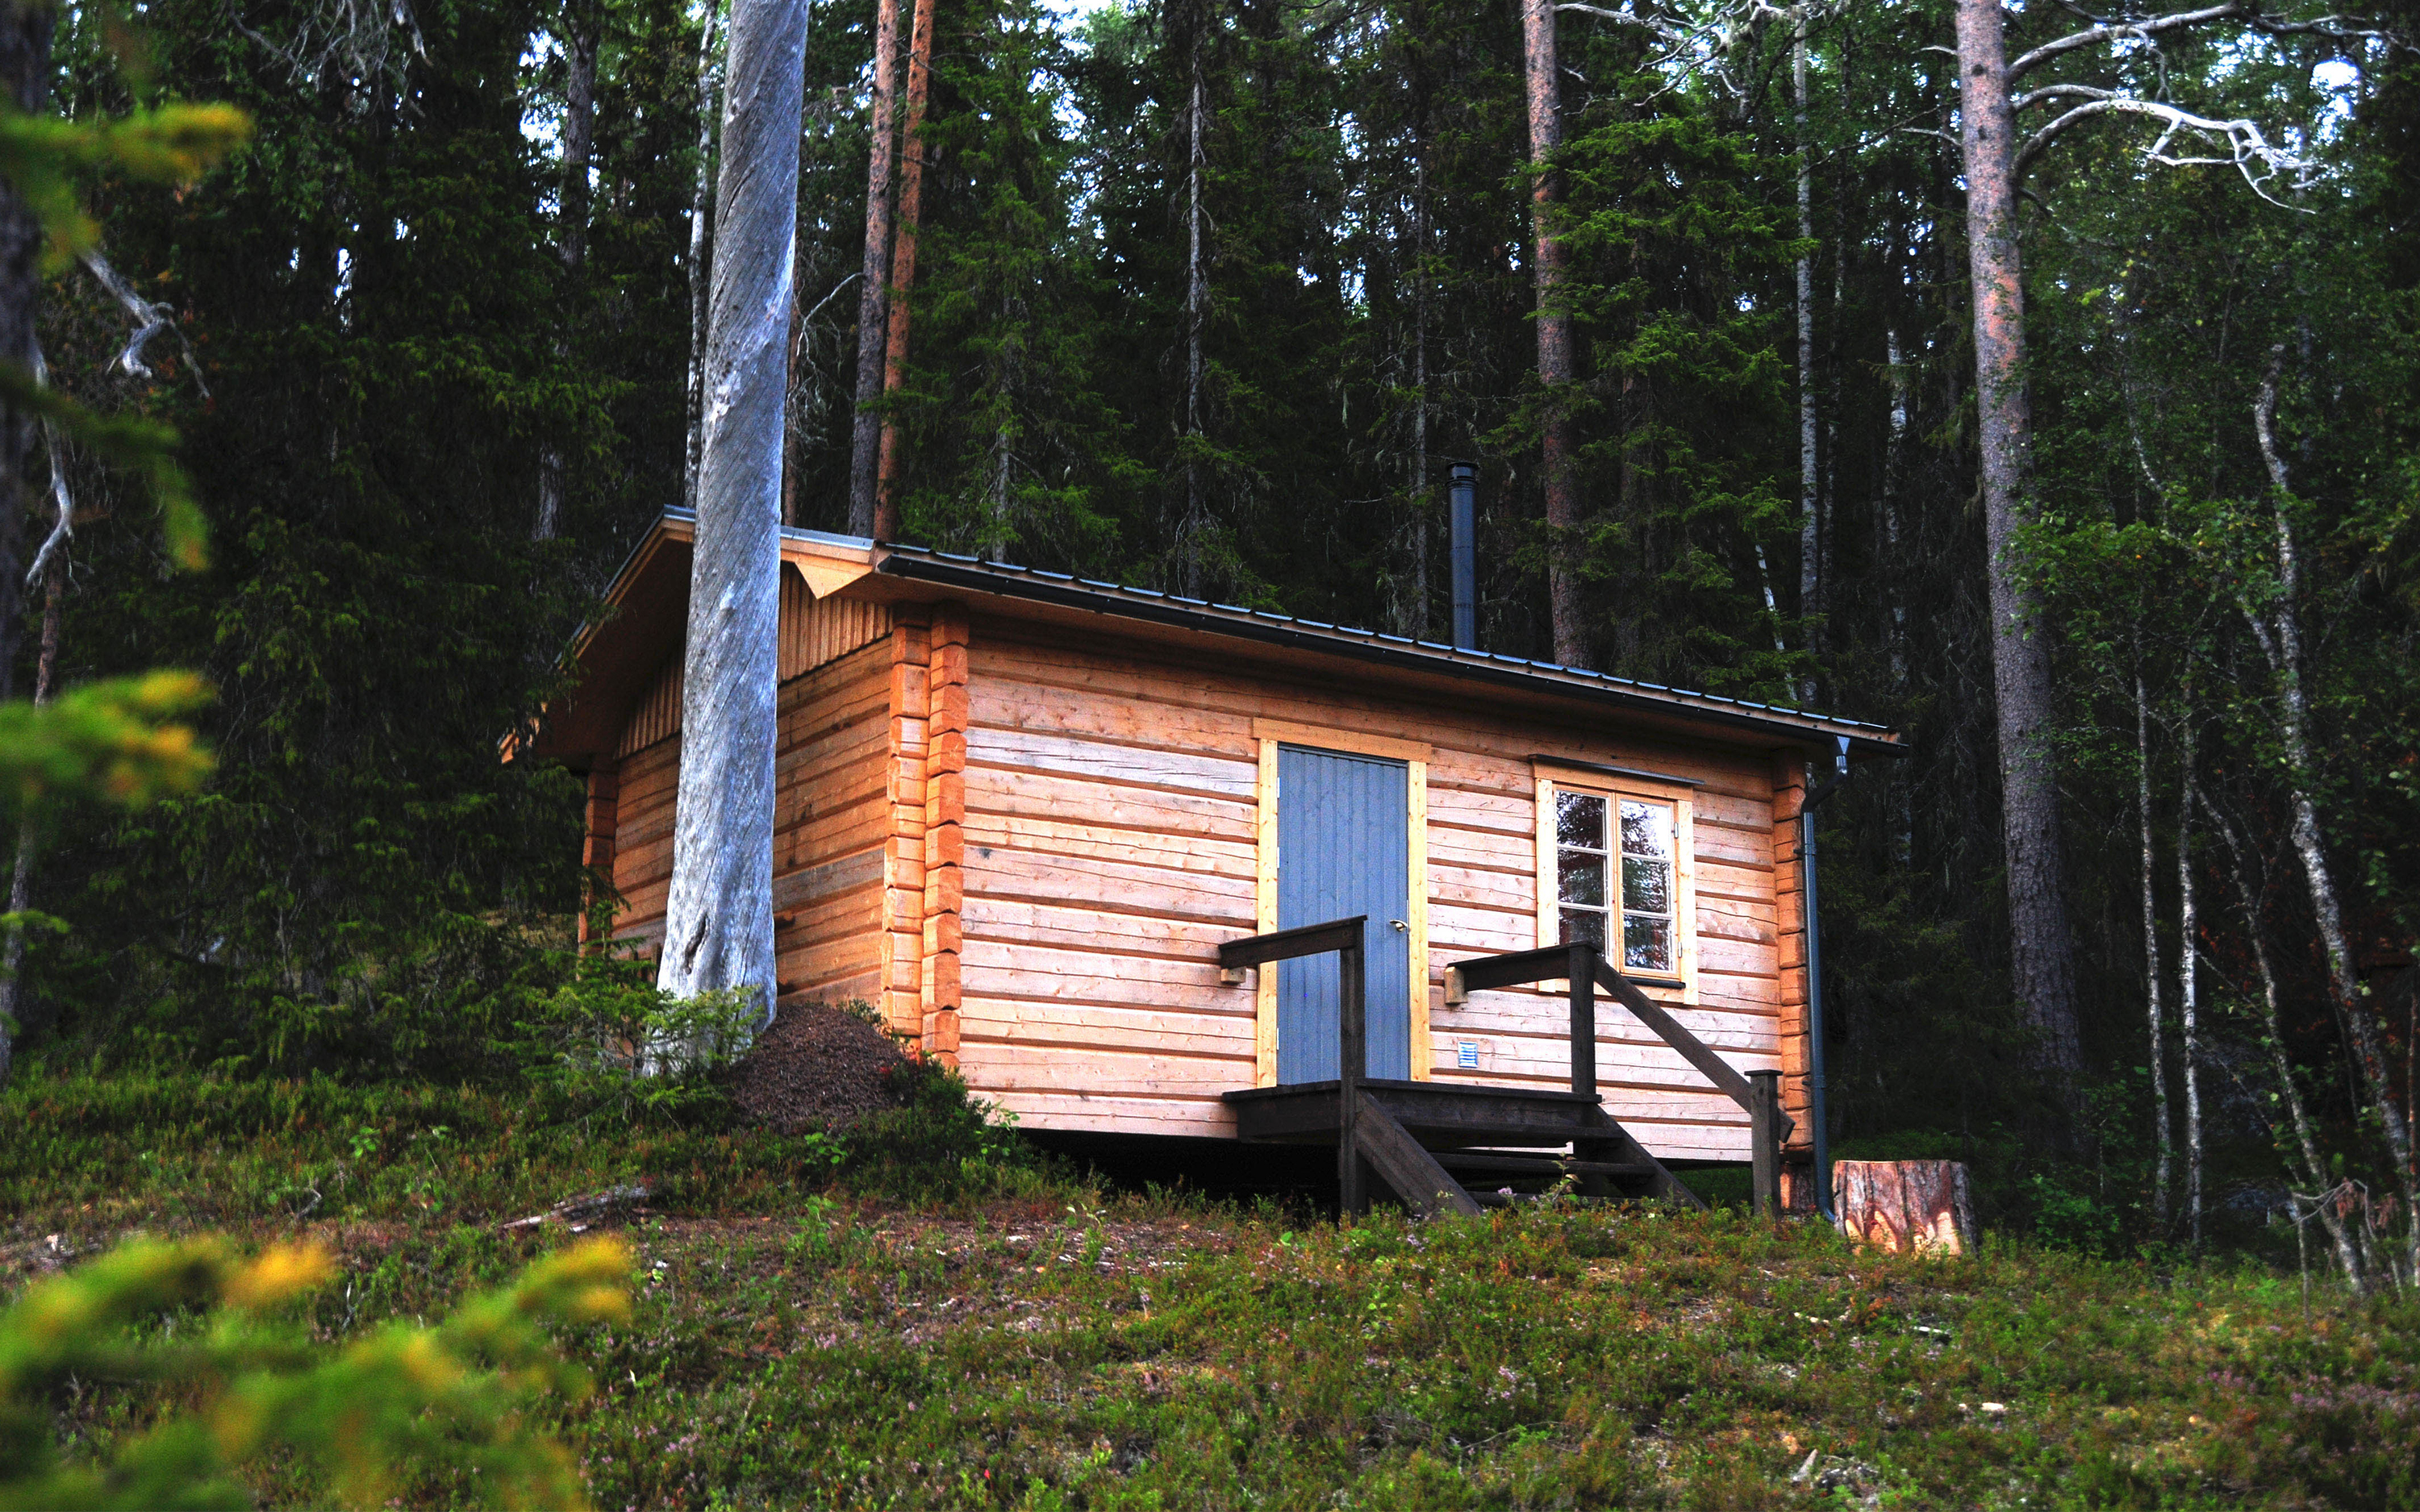 A cabin in a forest environment.